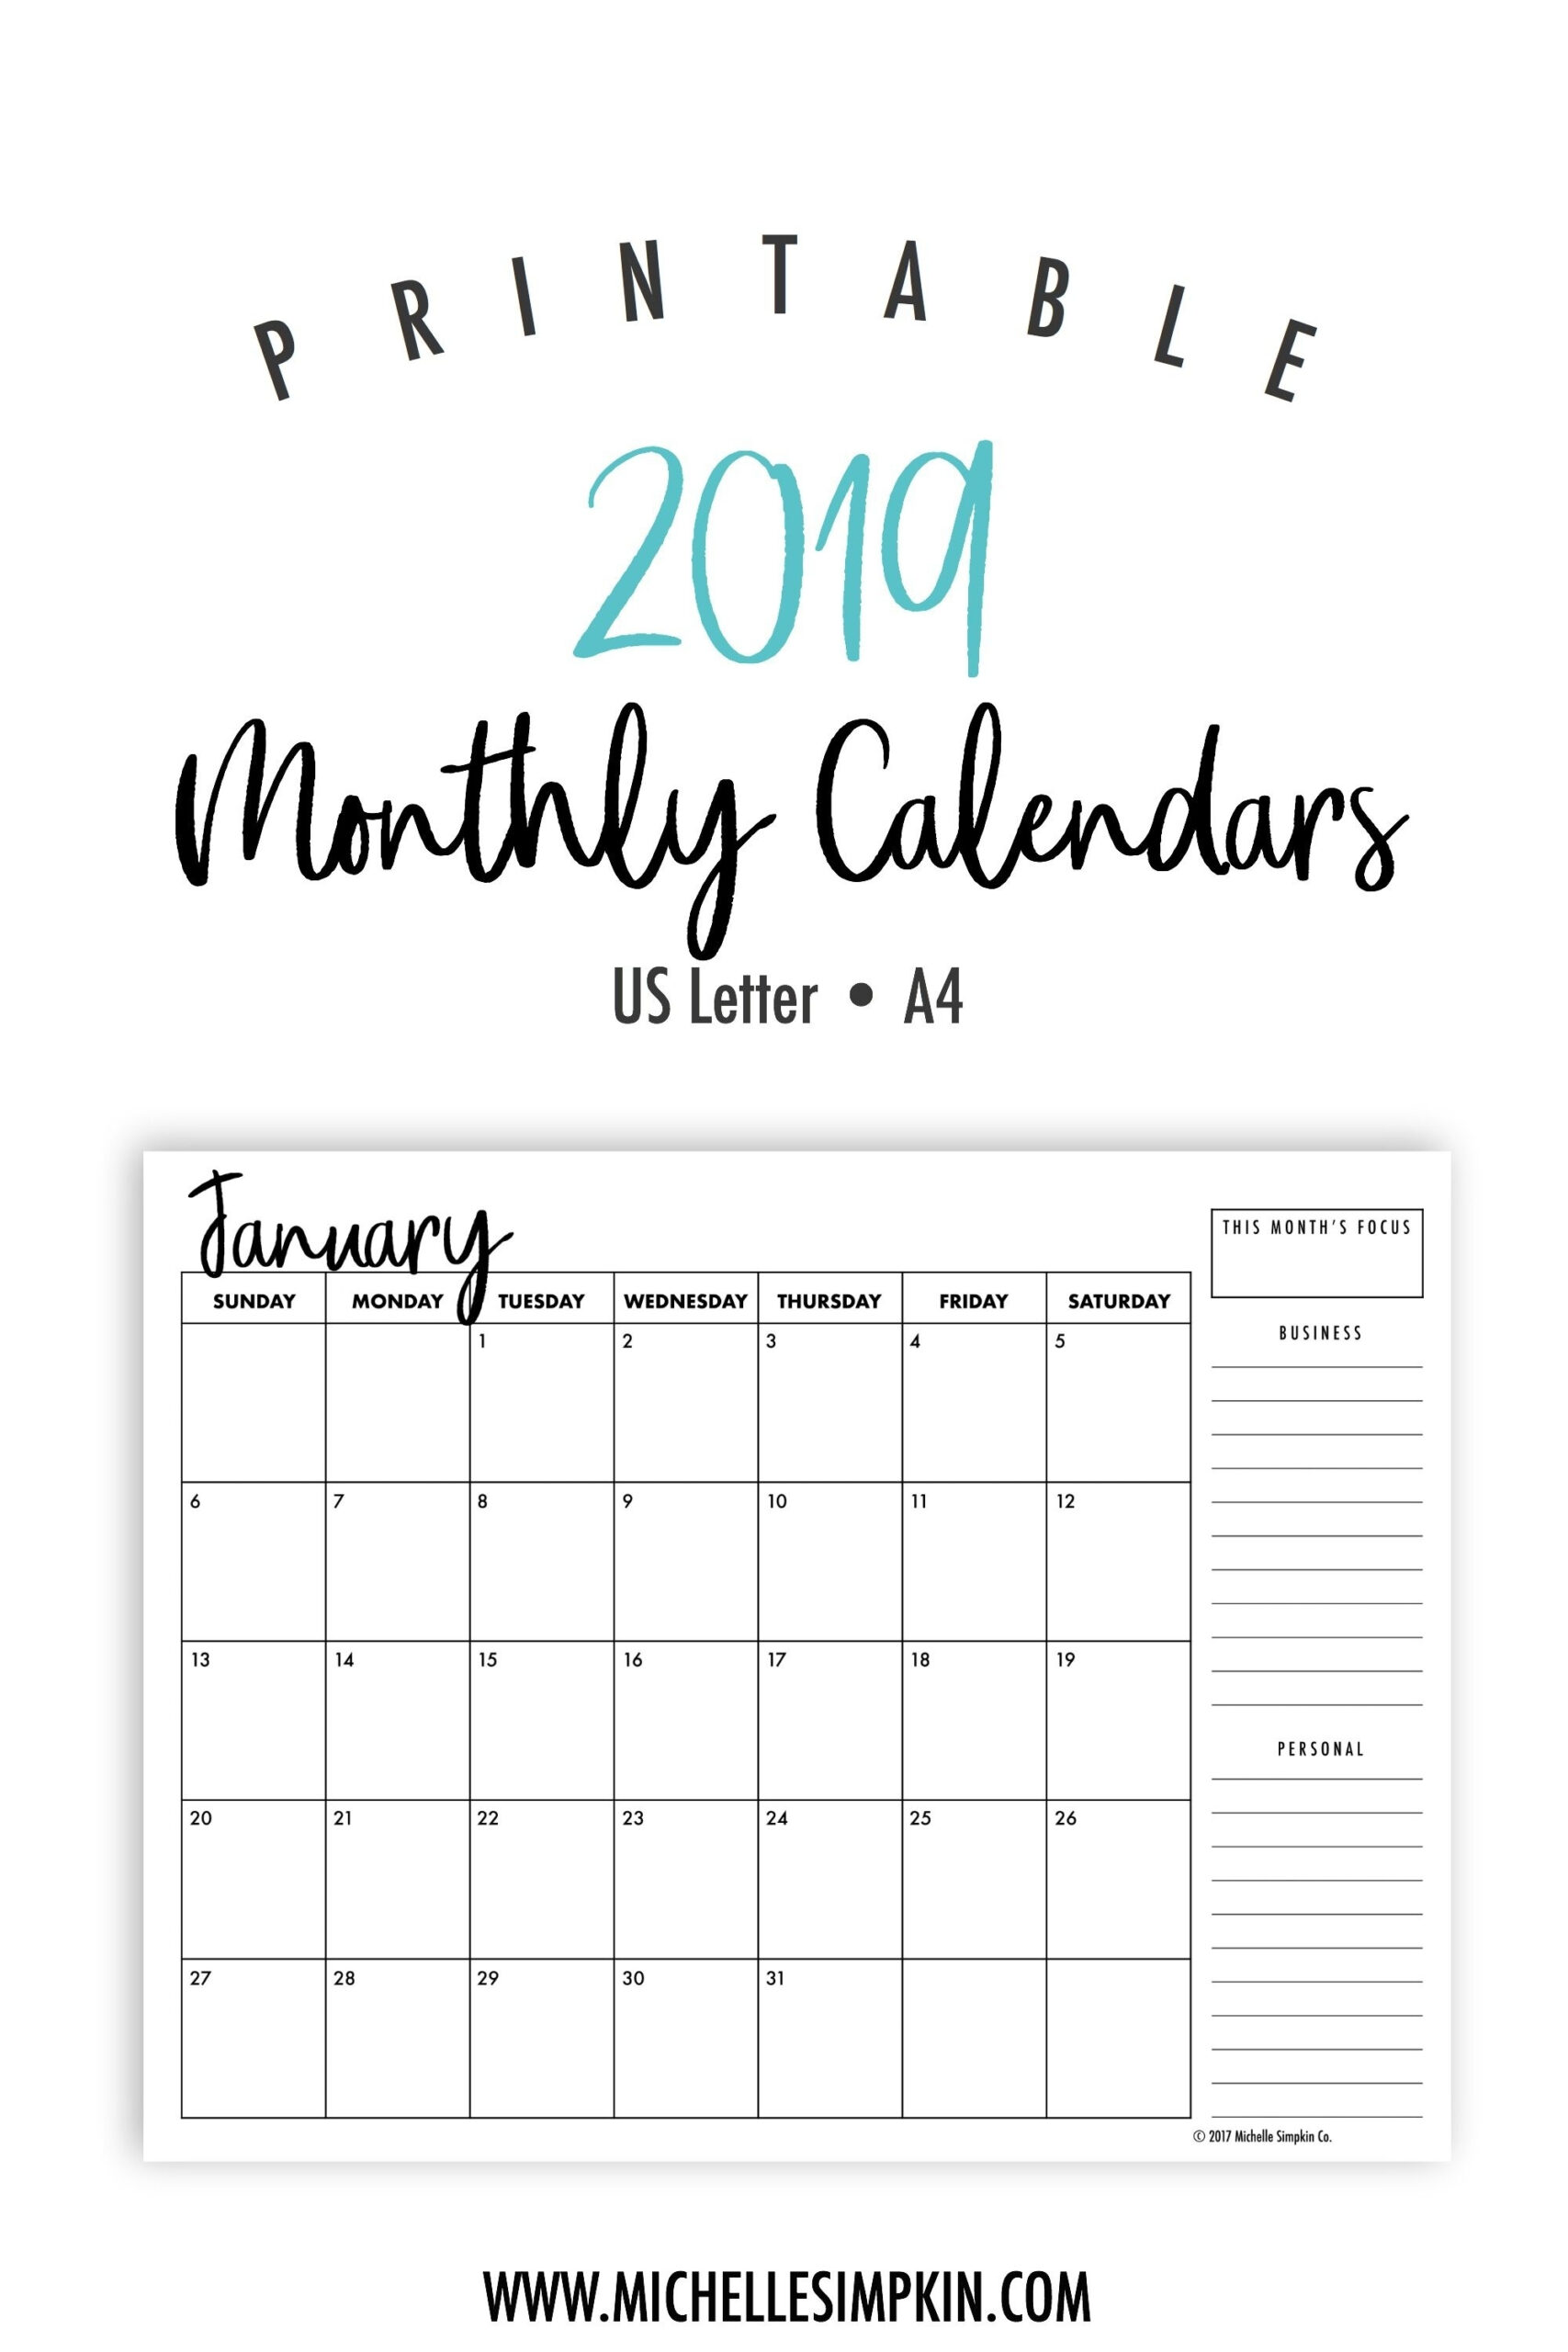 Printable Calendar Monthly 2019-2020 Free 11X17 Large